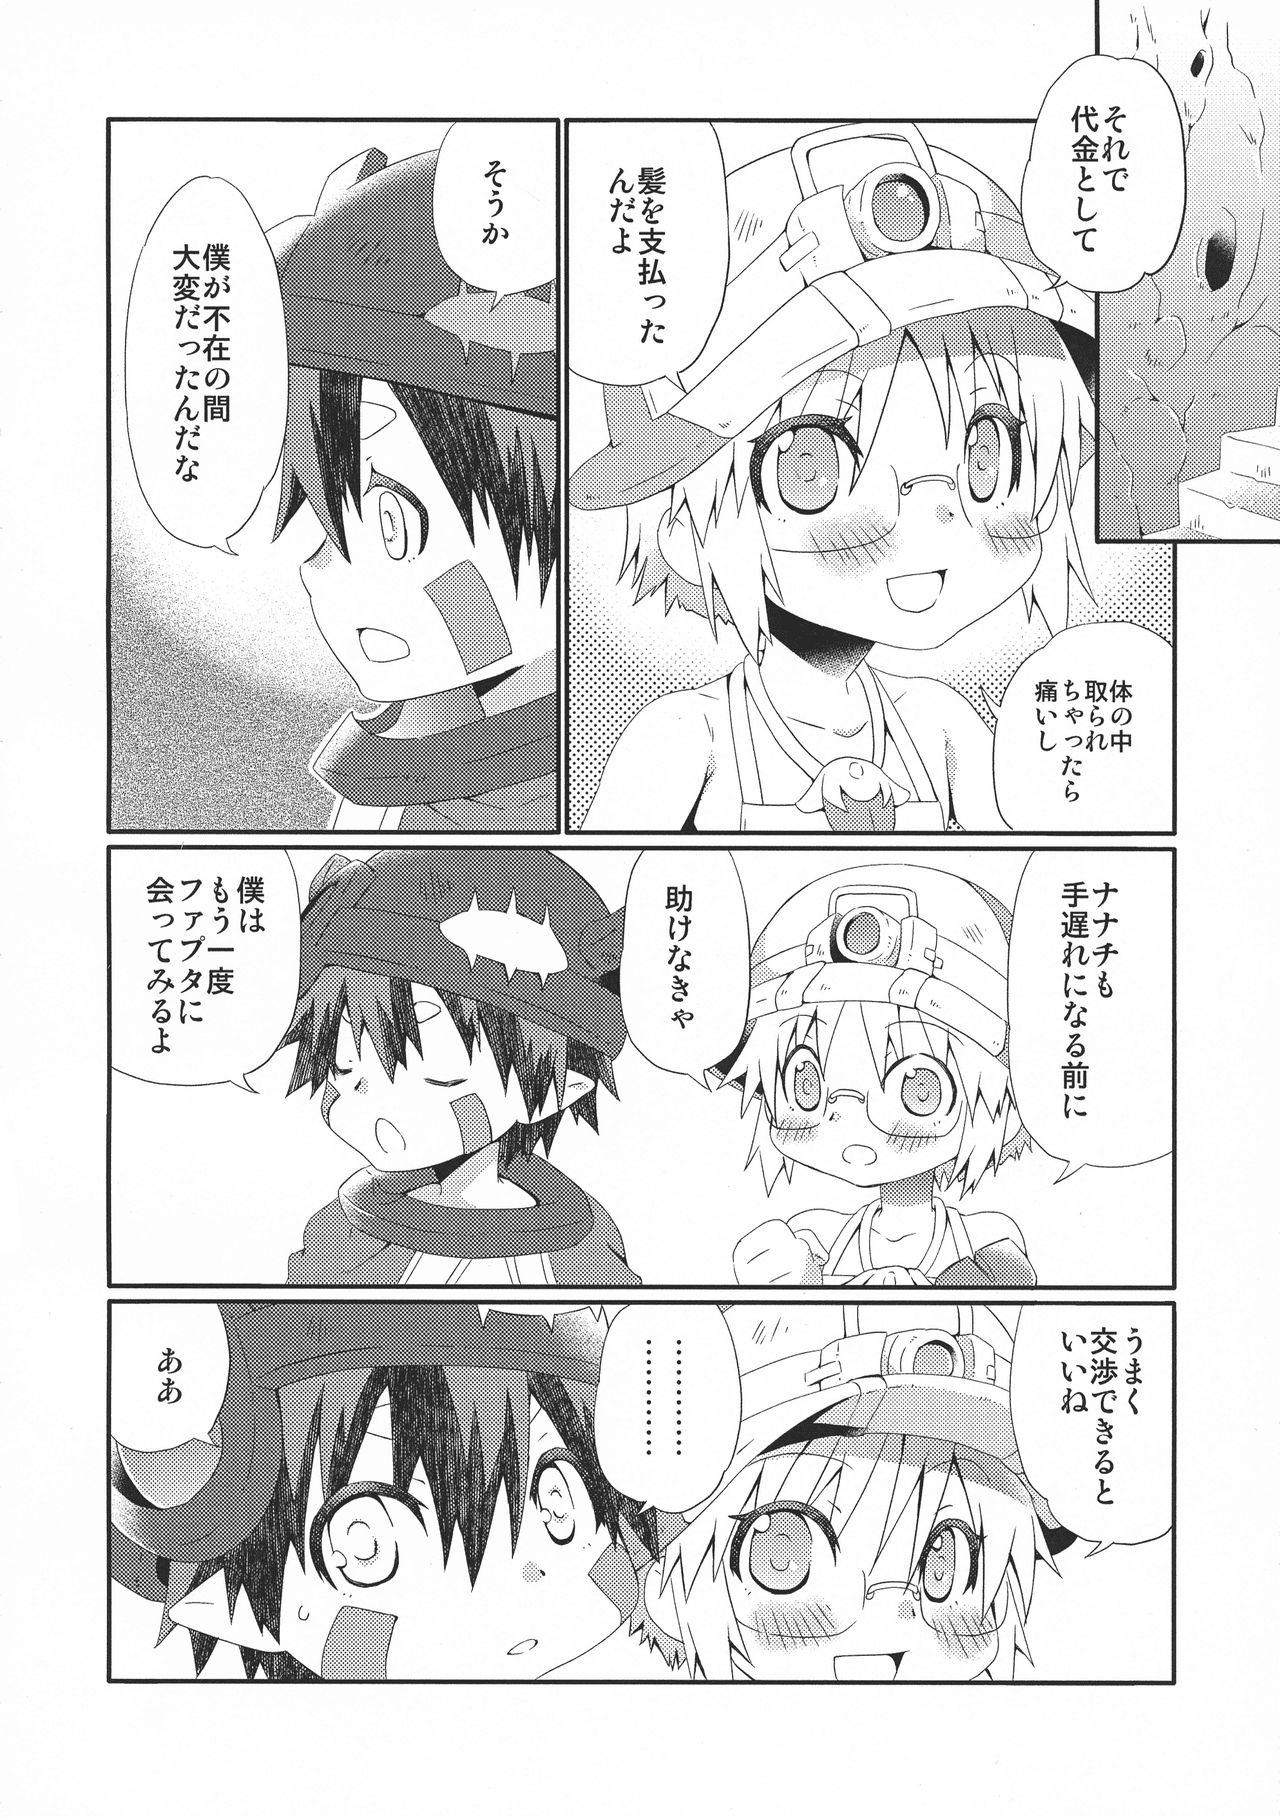 Chacal Tsugi no Shiji o Tanomu - Made in abyss Groupsex - Page 6